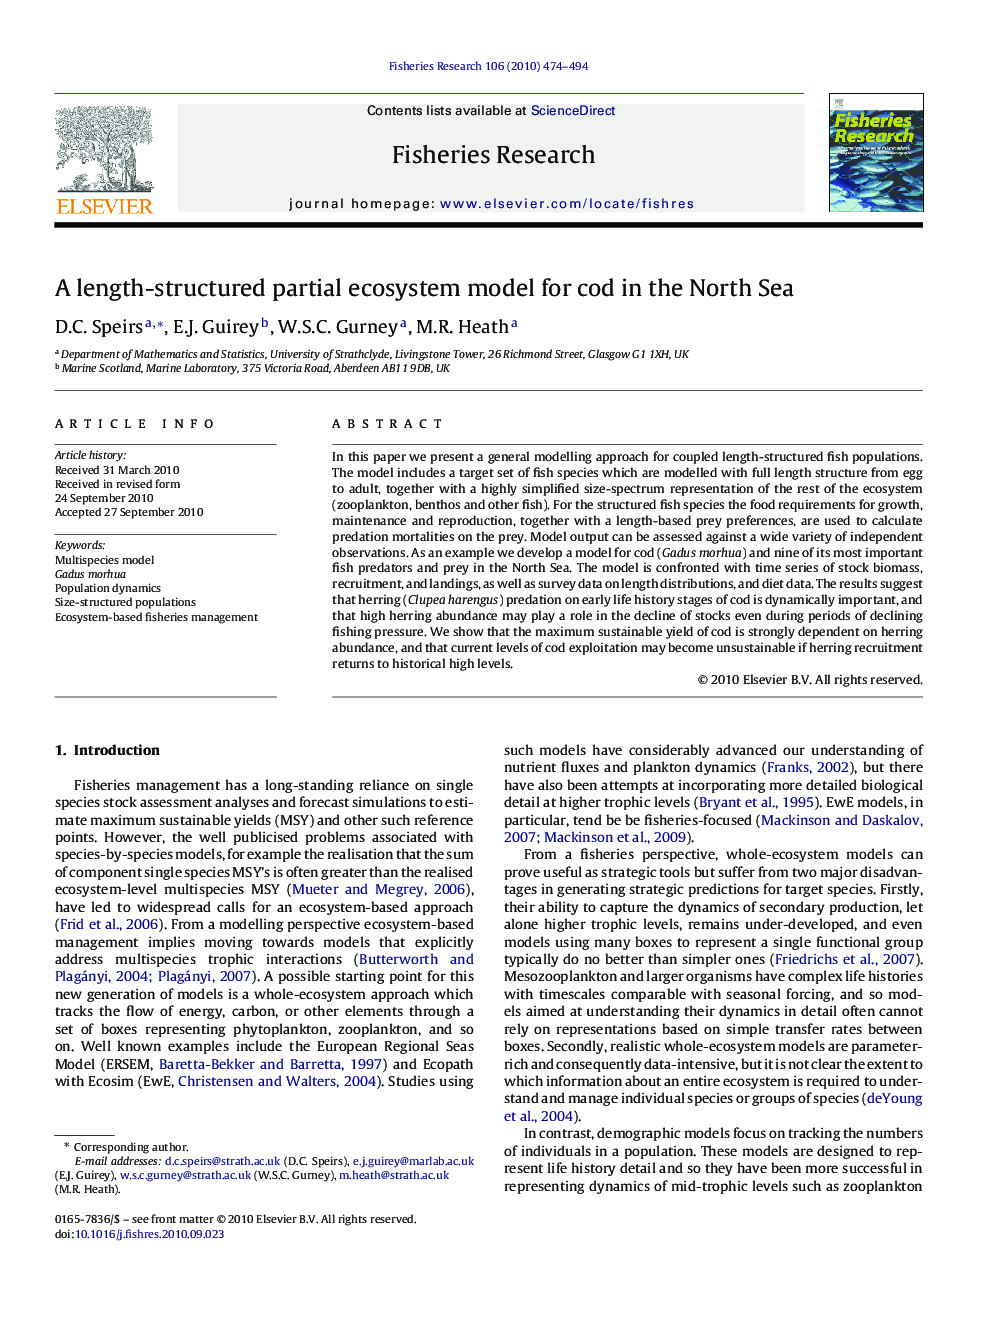 A length-structured partial ecosystem model for cod in the North Sea